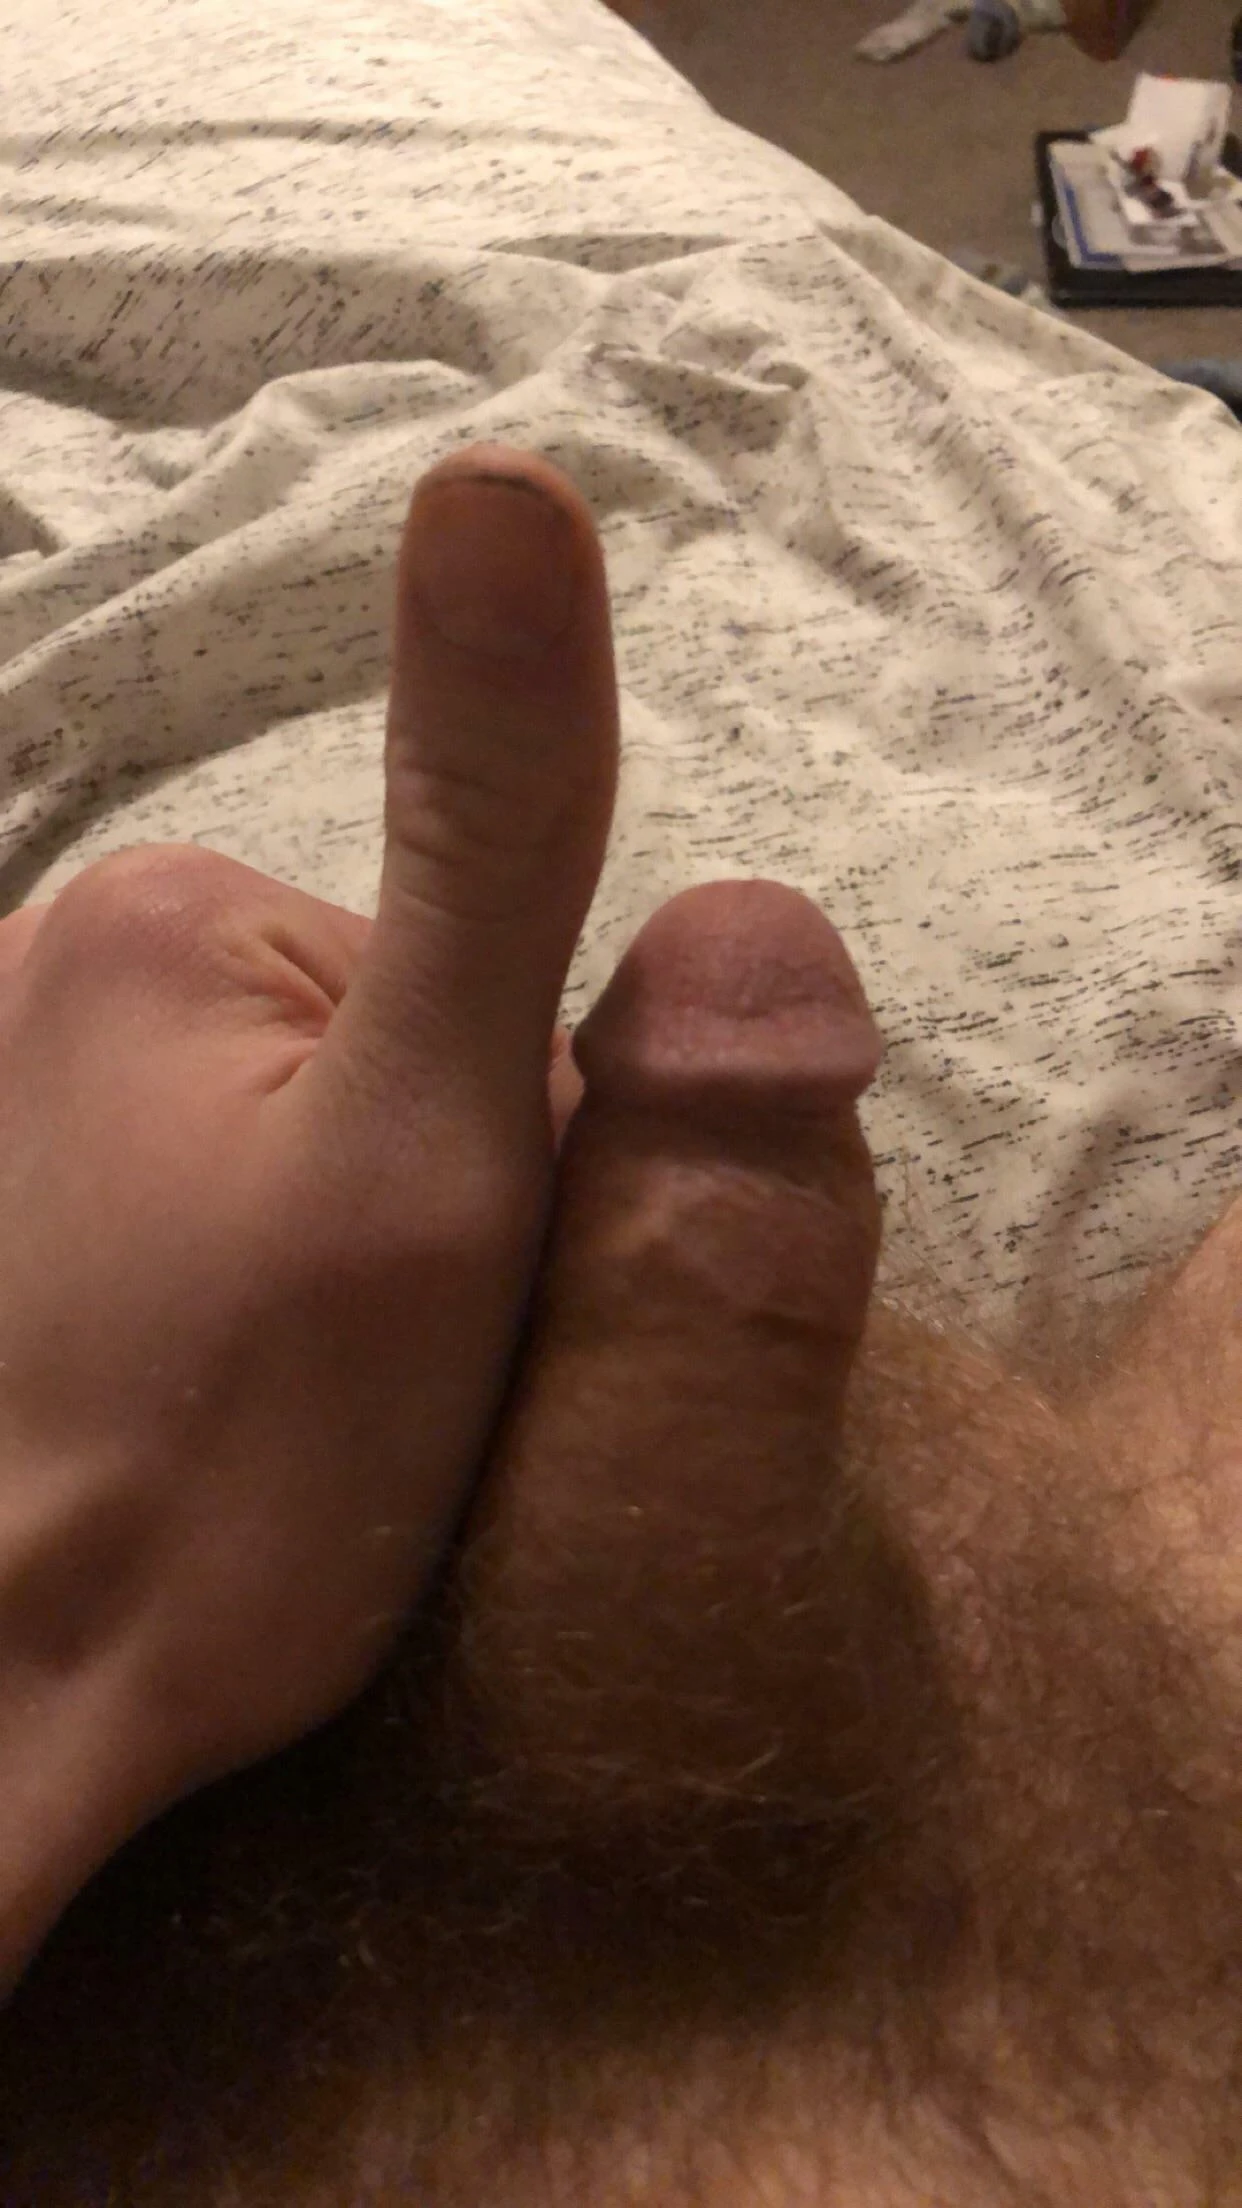 Got cucked by my girlfriend for the first time today, every up vote is a blowjob for her new fuck buddy every comment he gets to fuck her. Super embarrassed to show this thing